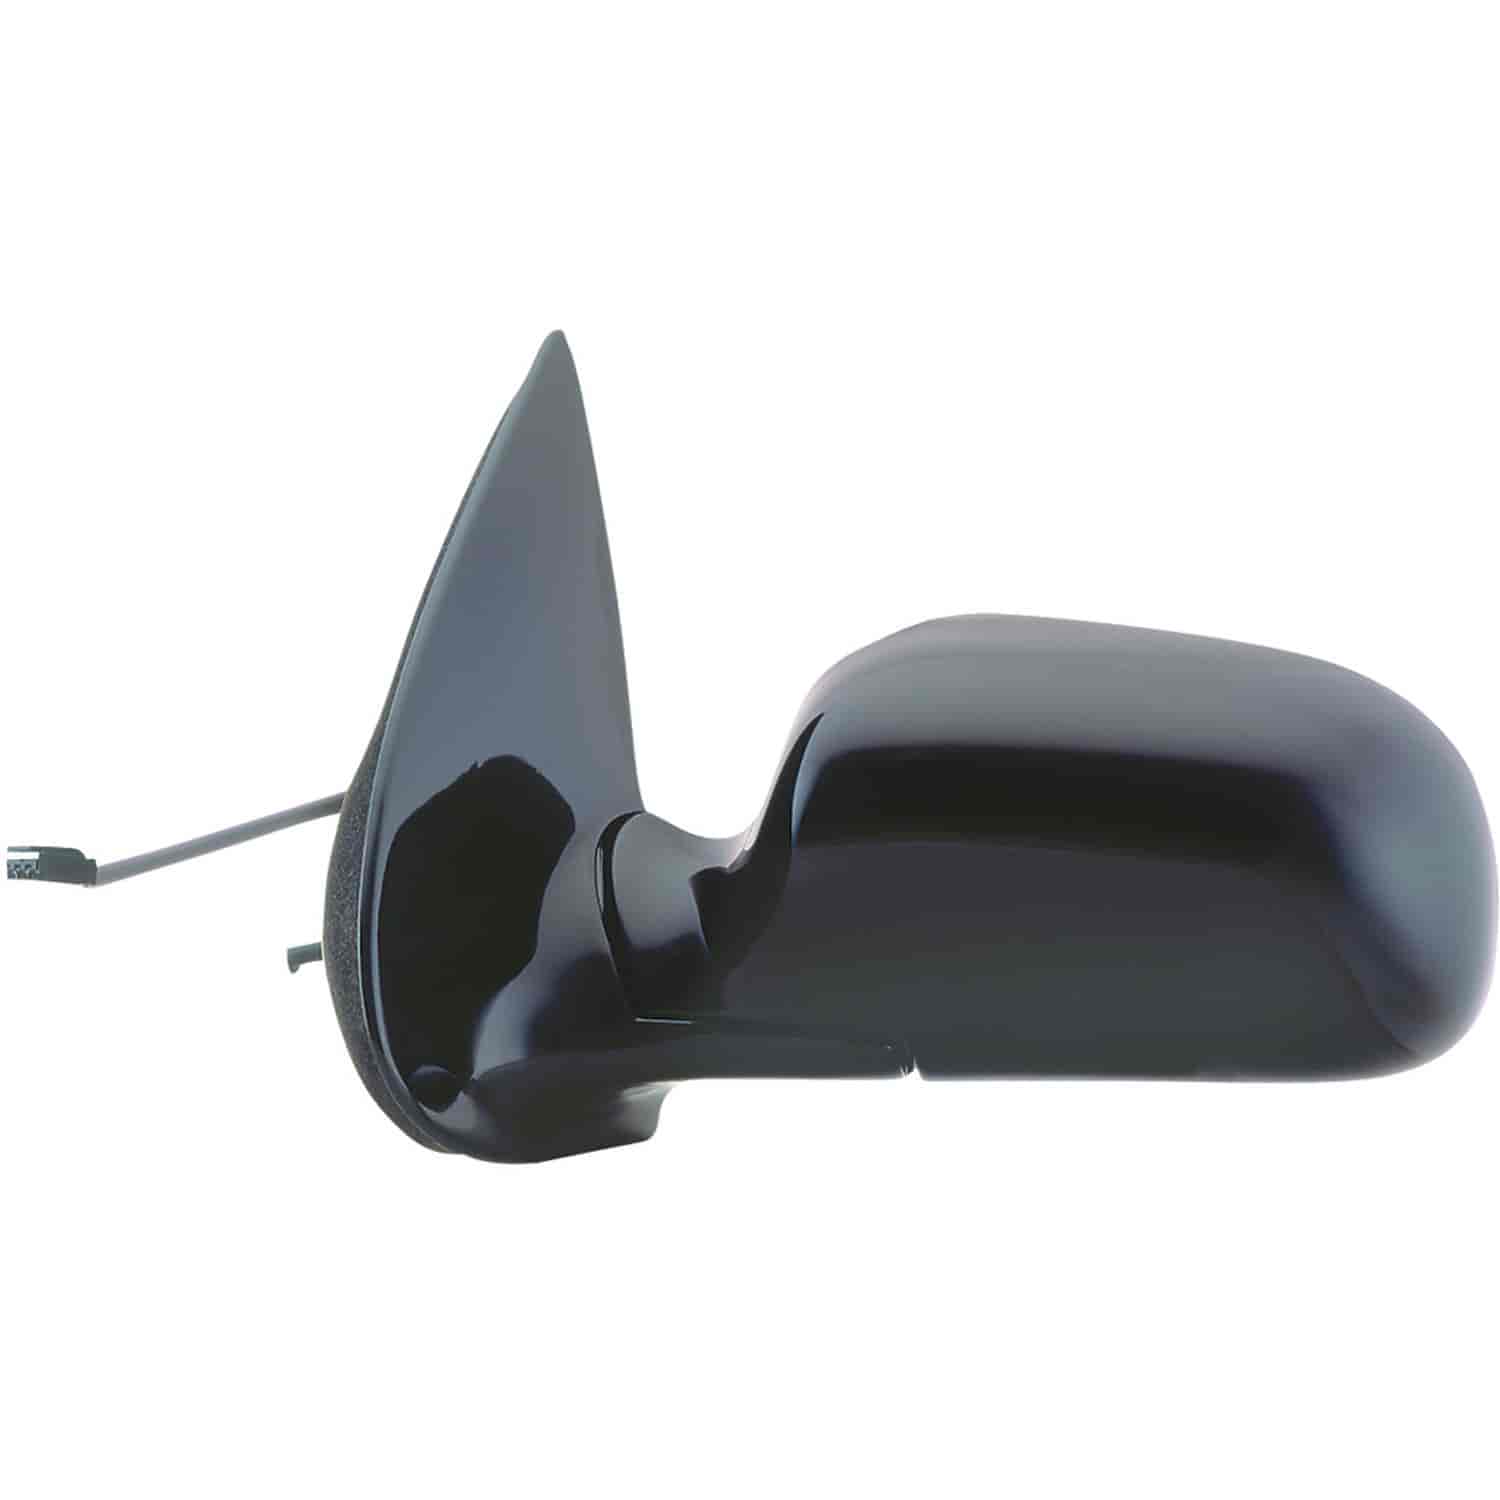 OEM Style Replacement mirror for 97-98 Ford Windstar